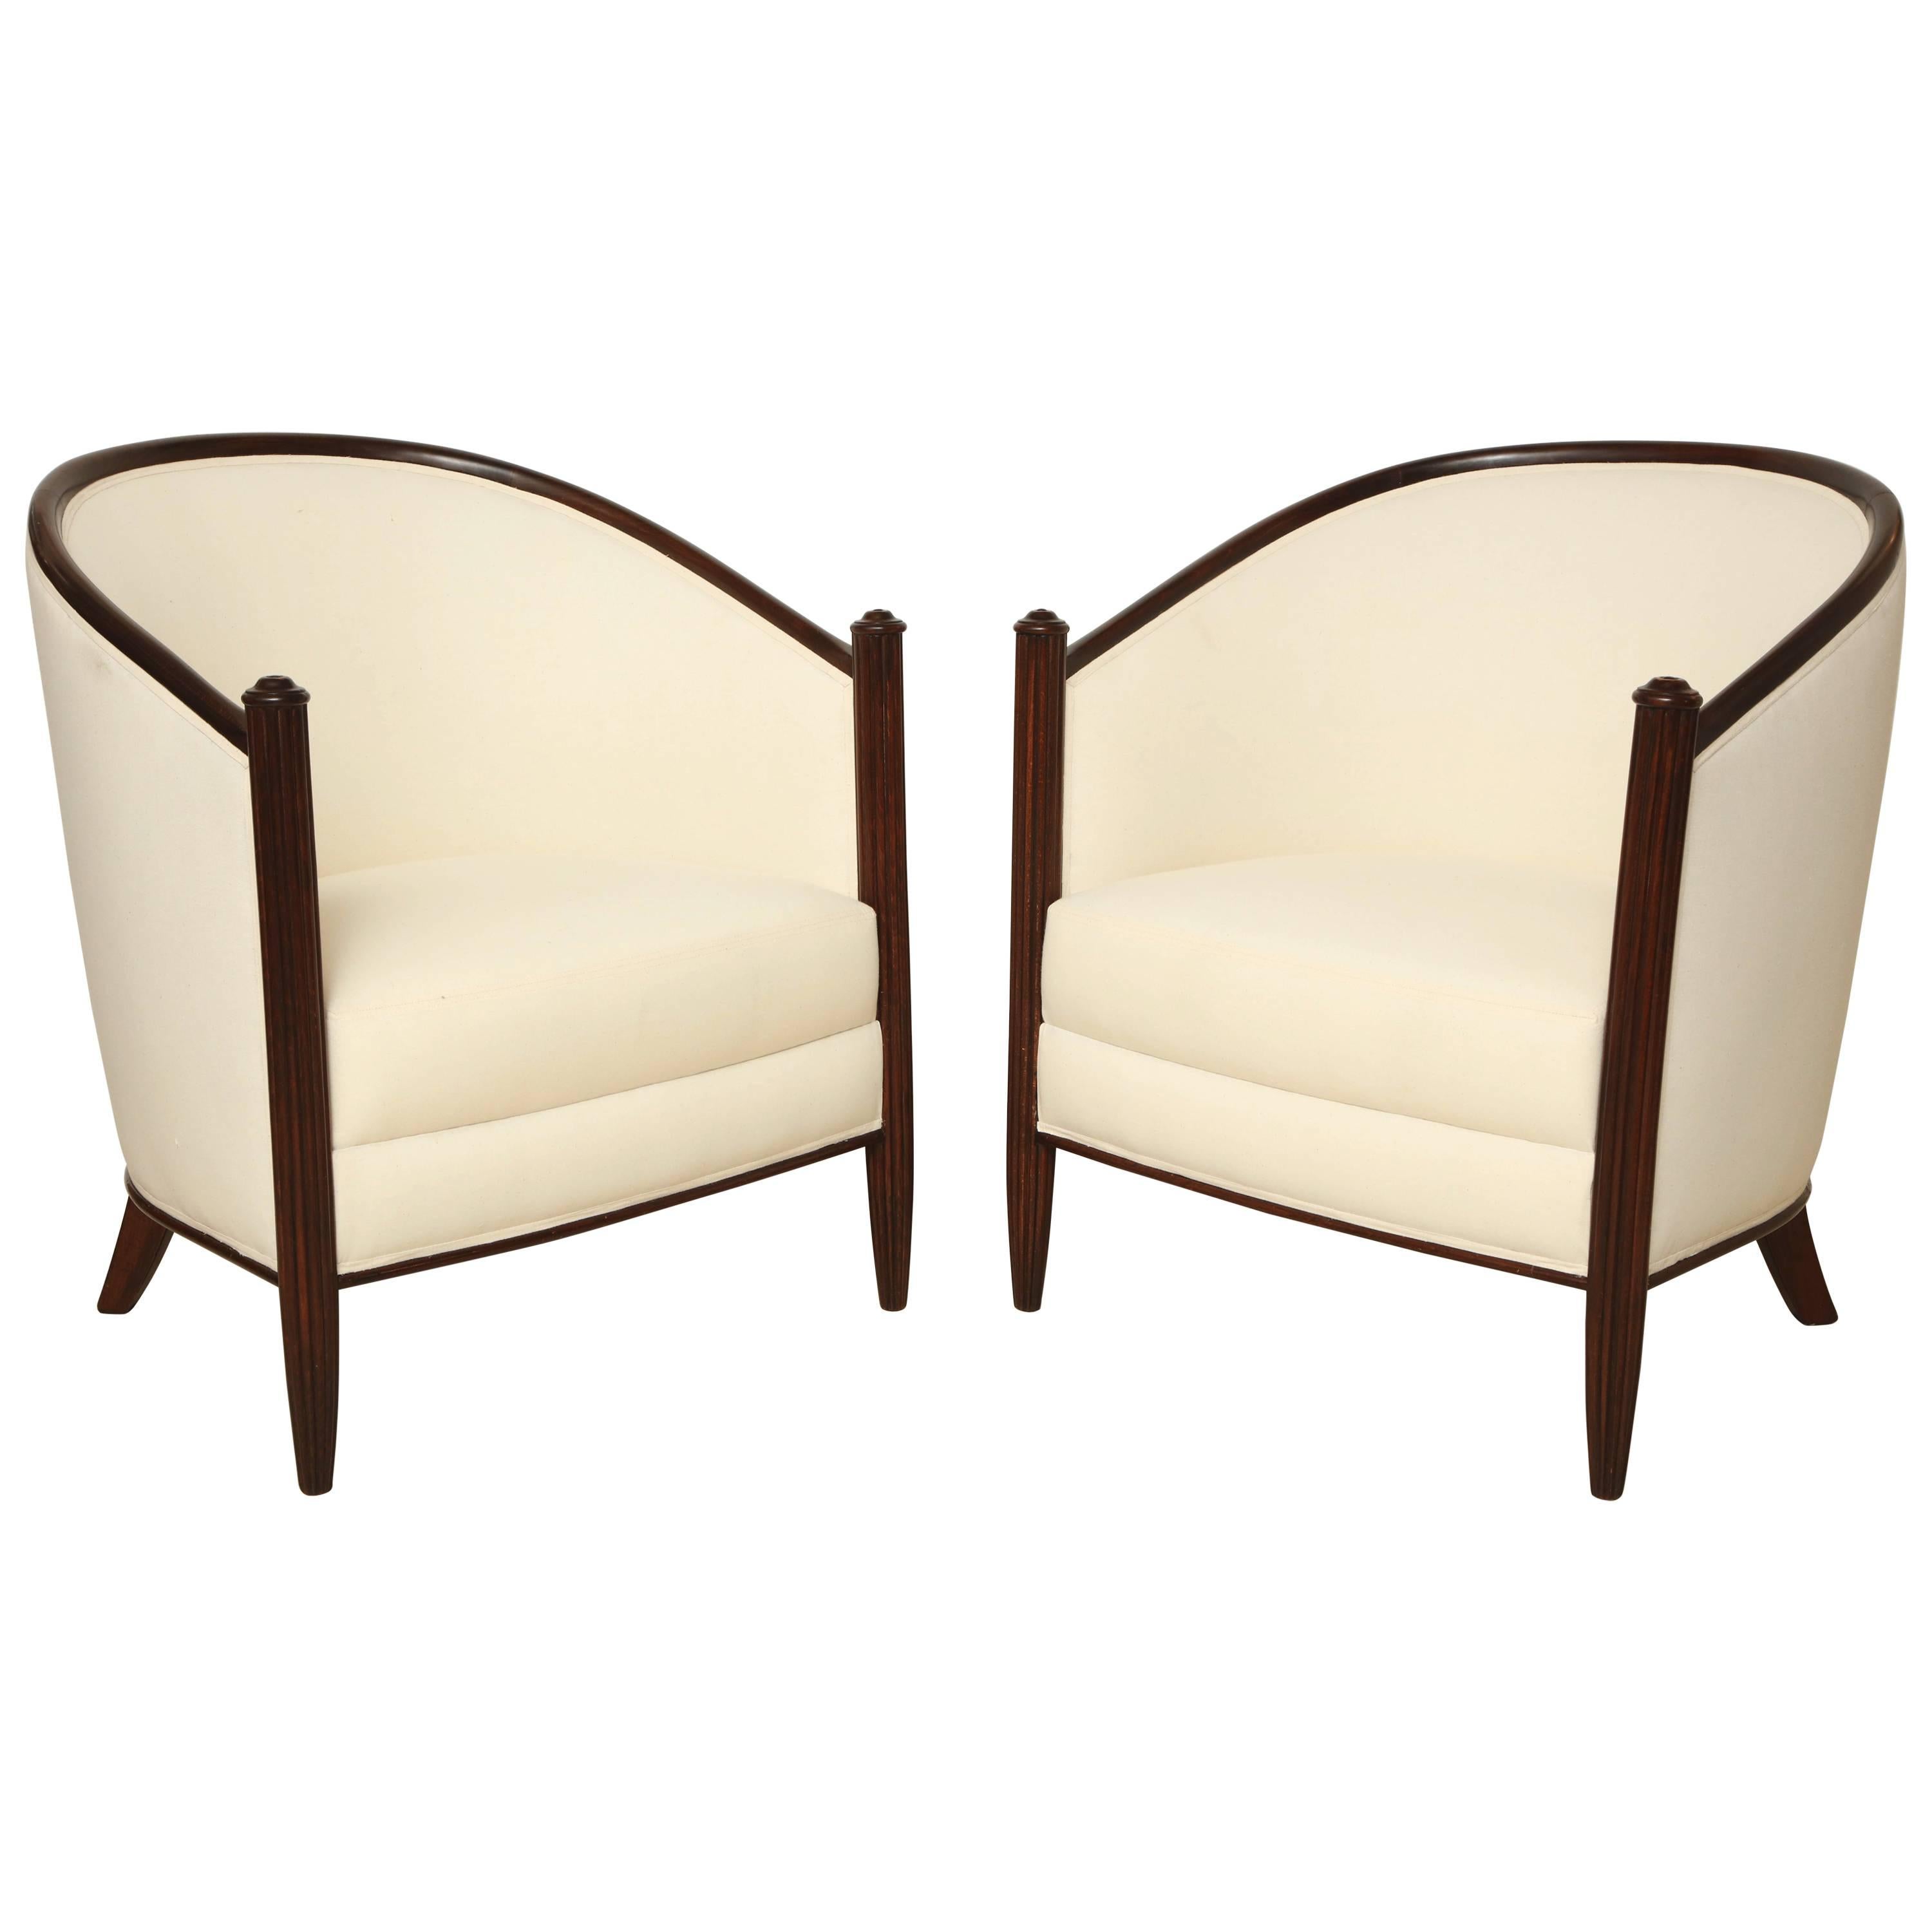 Pair of Beechwood Art Deco Upholstered Club Chairs, France, circa 1930